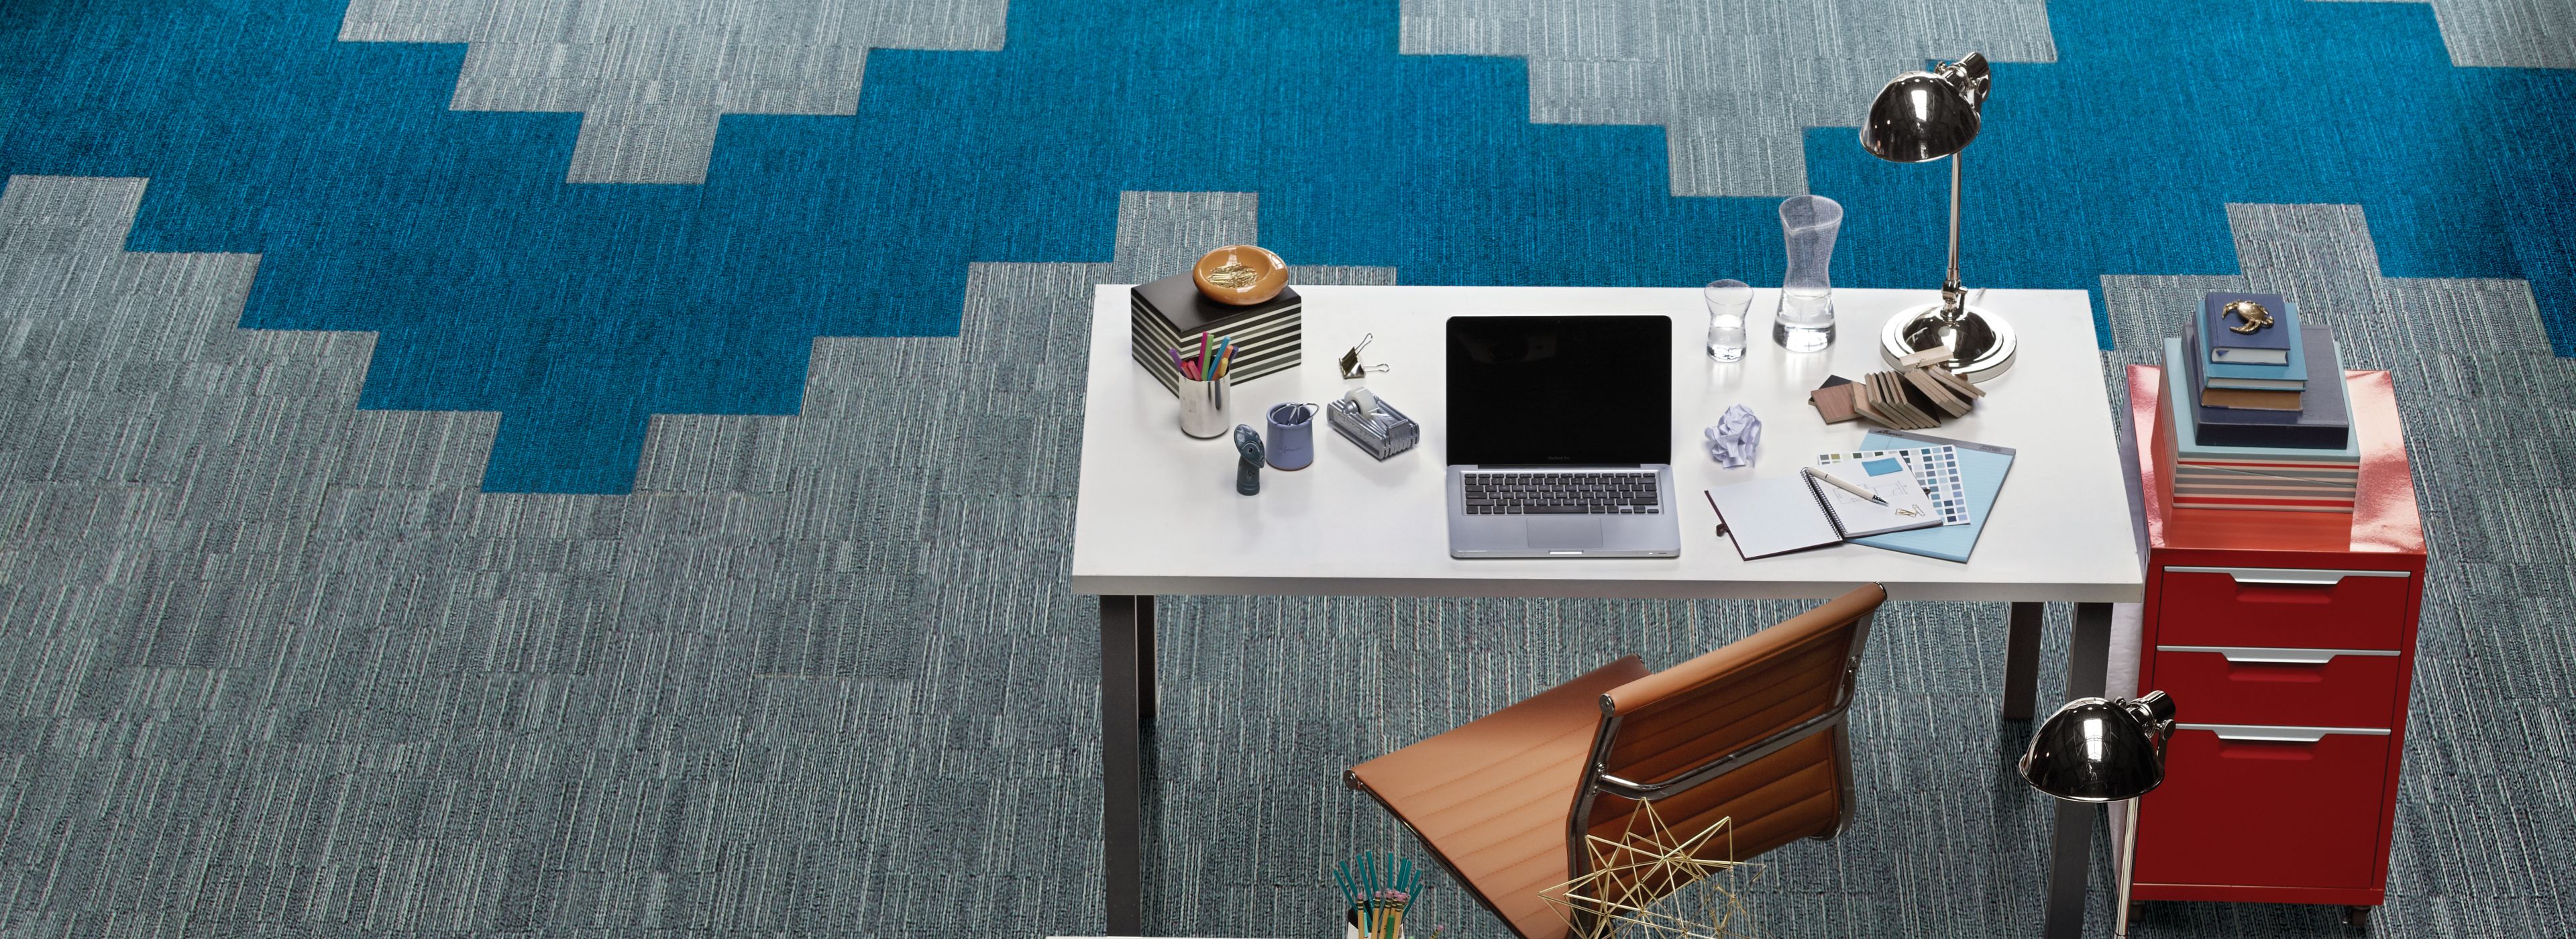 Aerial view of Interface B702 plank carpet tile in open office with red filing cabinets imagen número 1